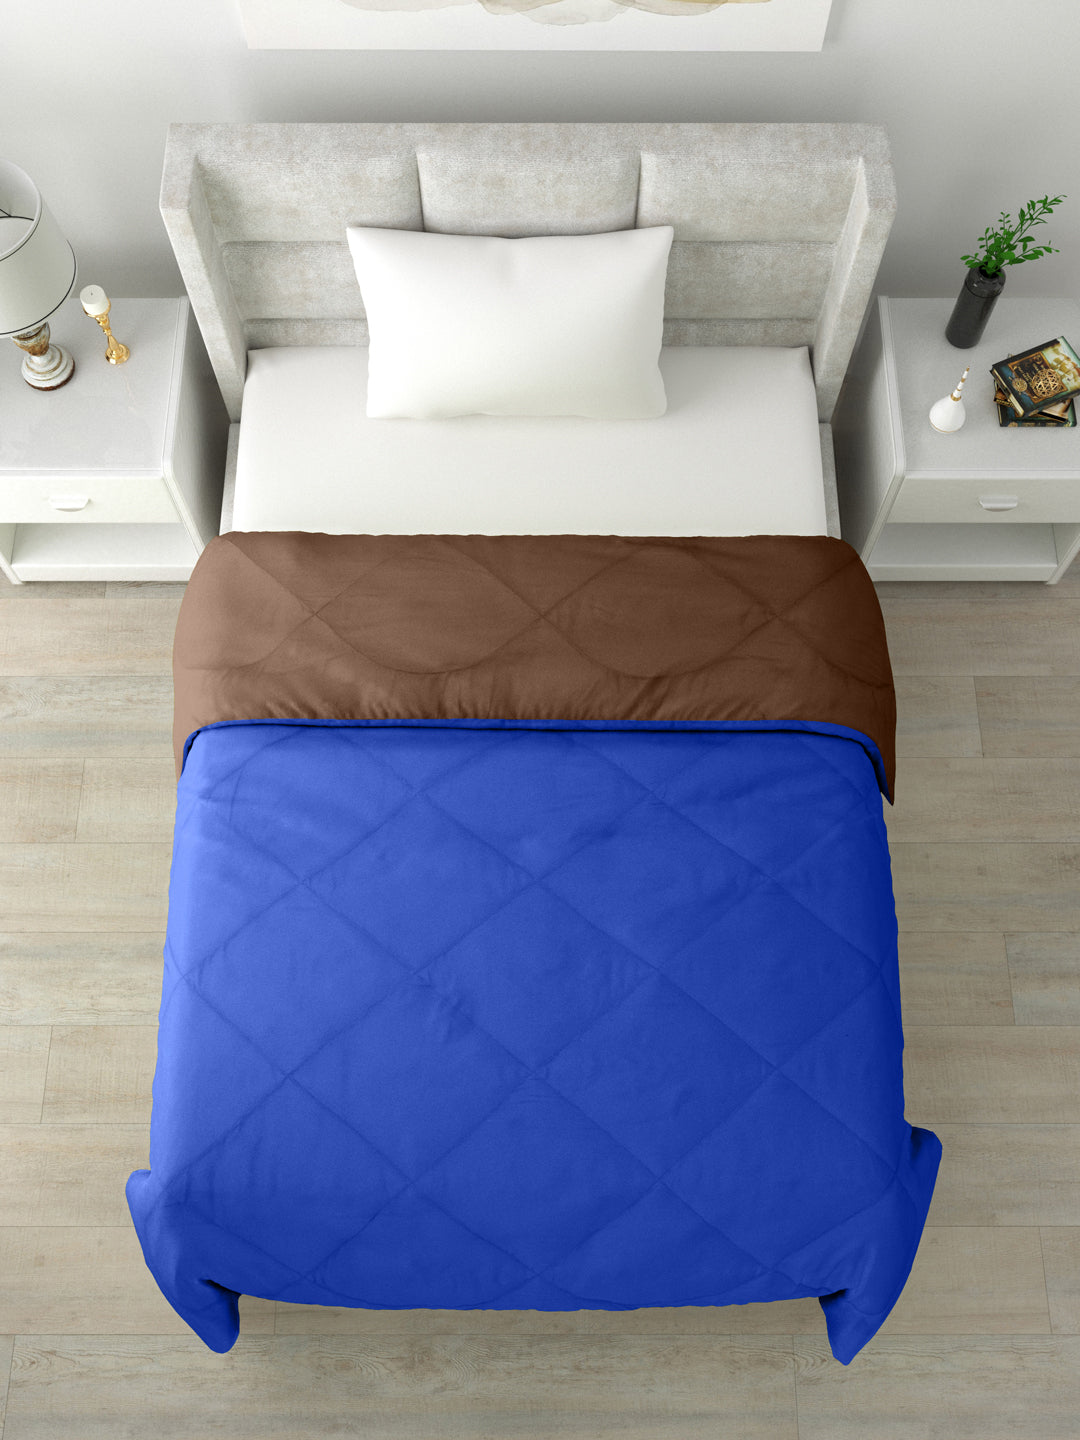 Reversible Single Bed Comforter 200 GSM 60x90 Inches (Blue & Brown)